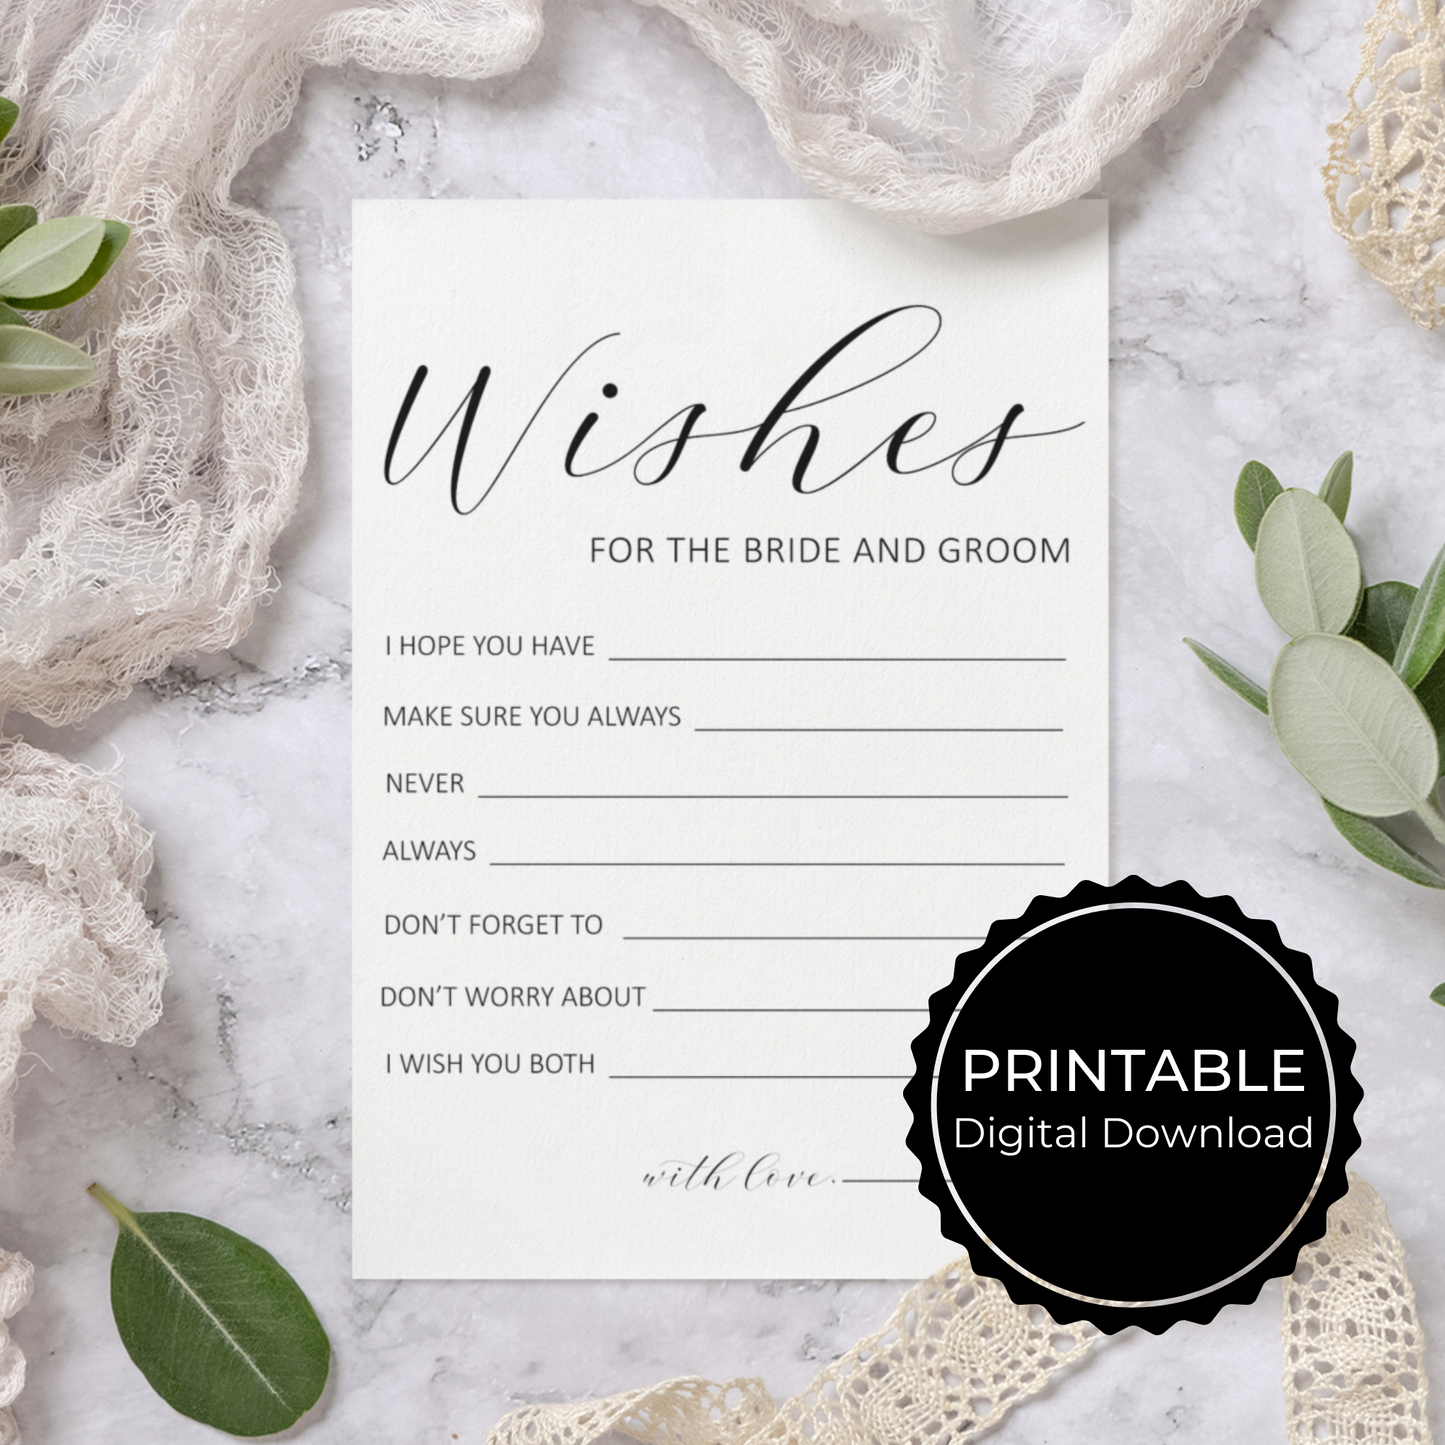 Advice and Wishes for the Bride and Groom Printable - Minimalist